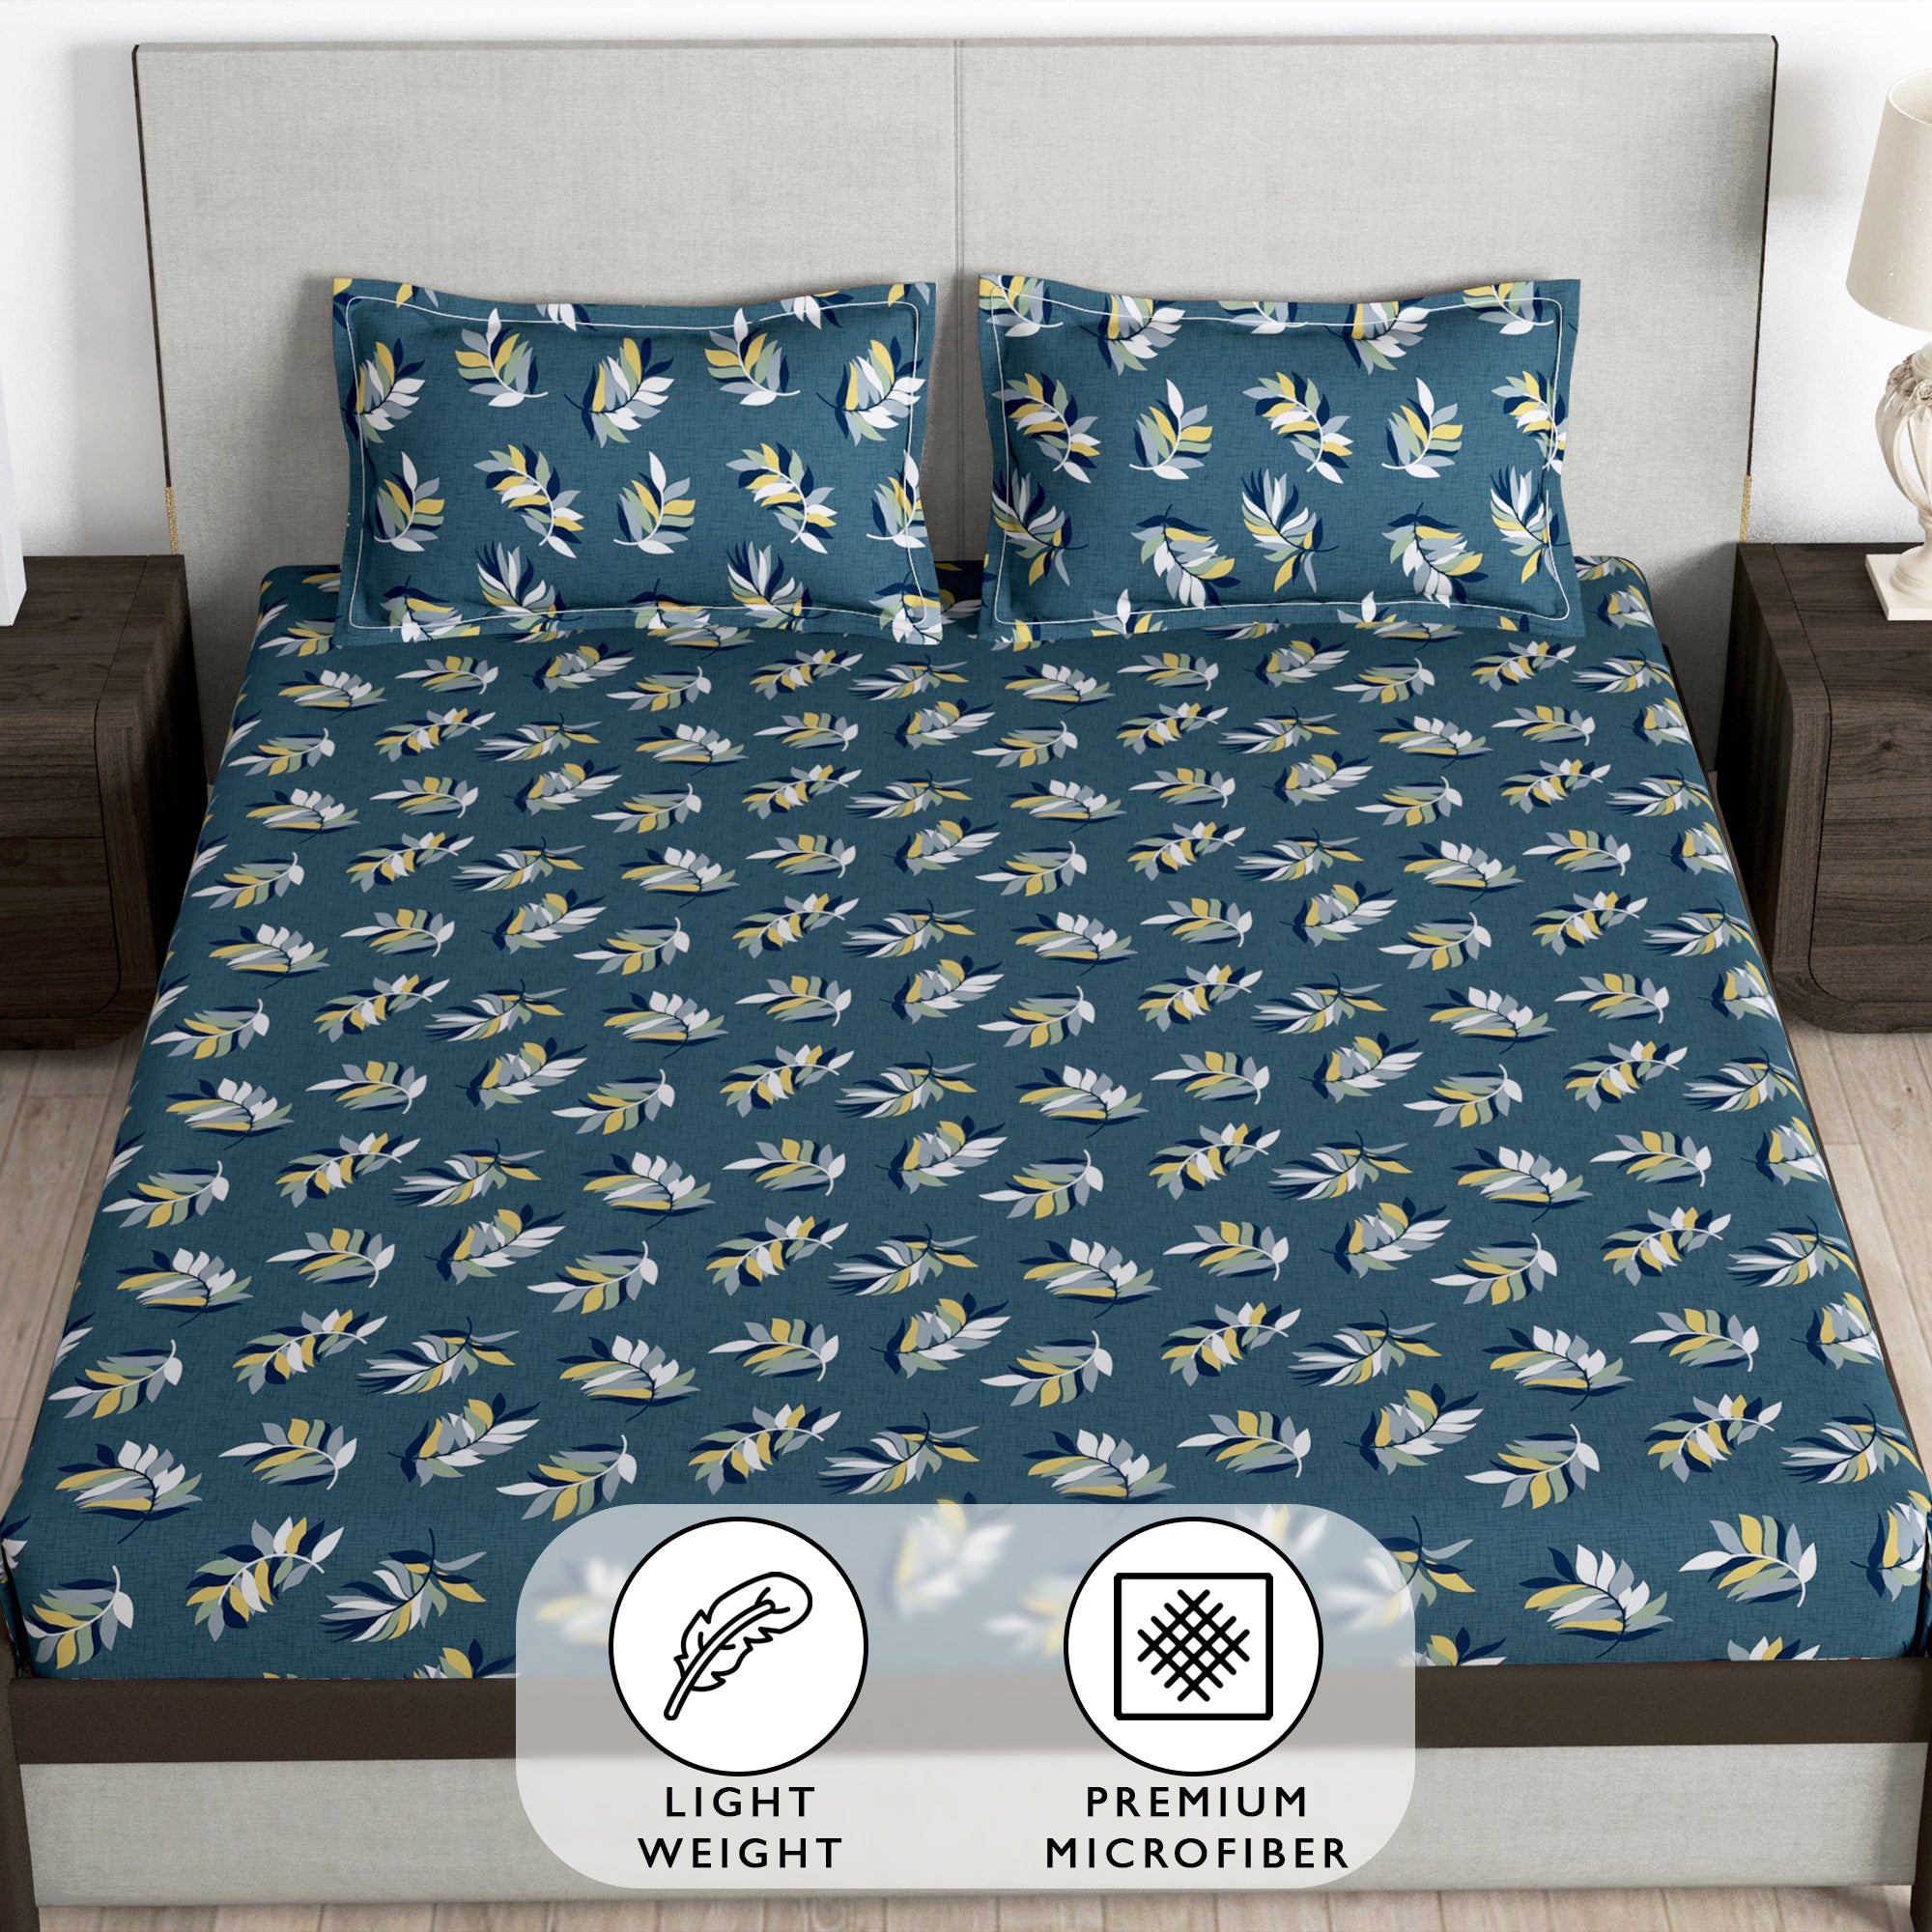 Story@Home 2 Pcs Arena Microfiber Double Bedsheets Combo With 4 Pillow Covers - Grey & Blue